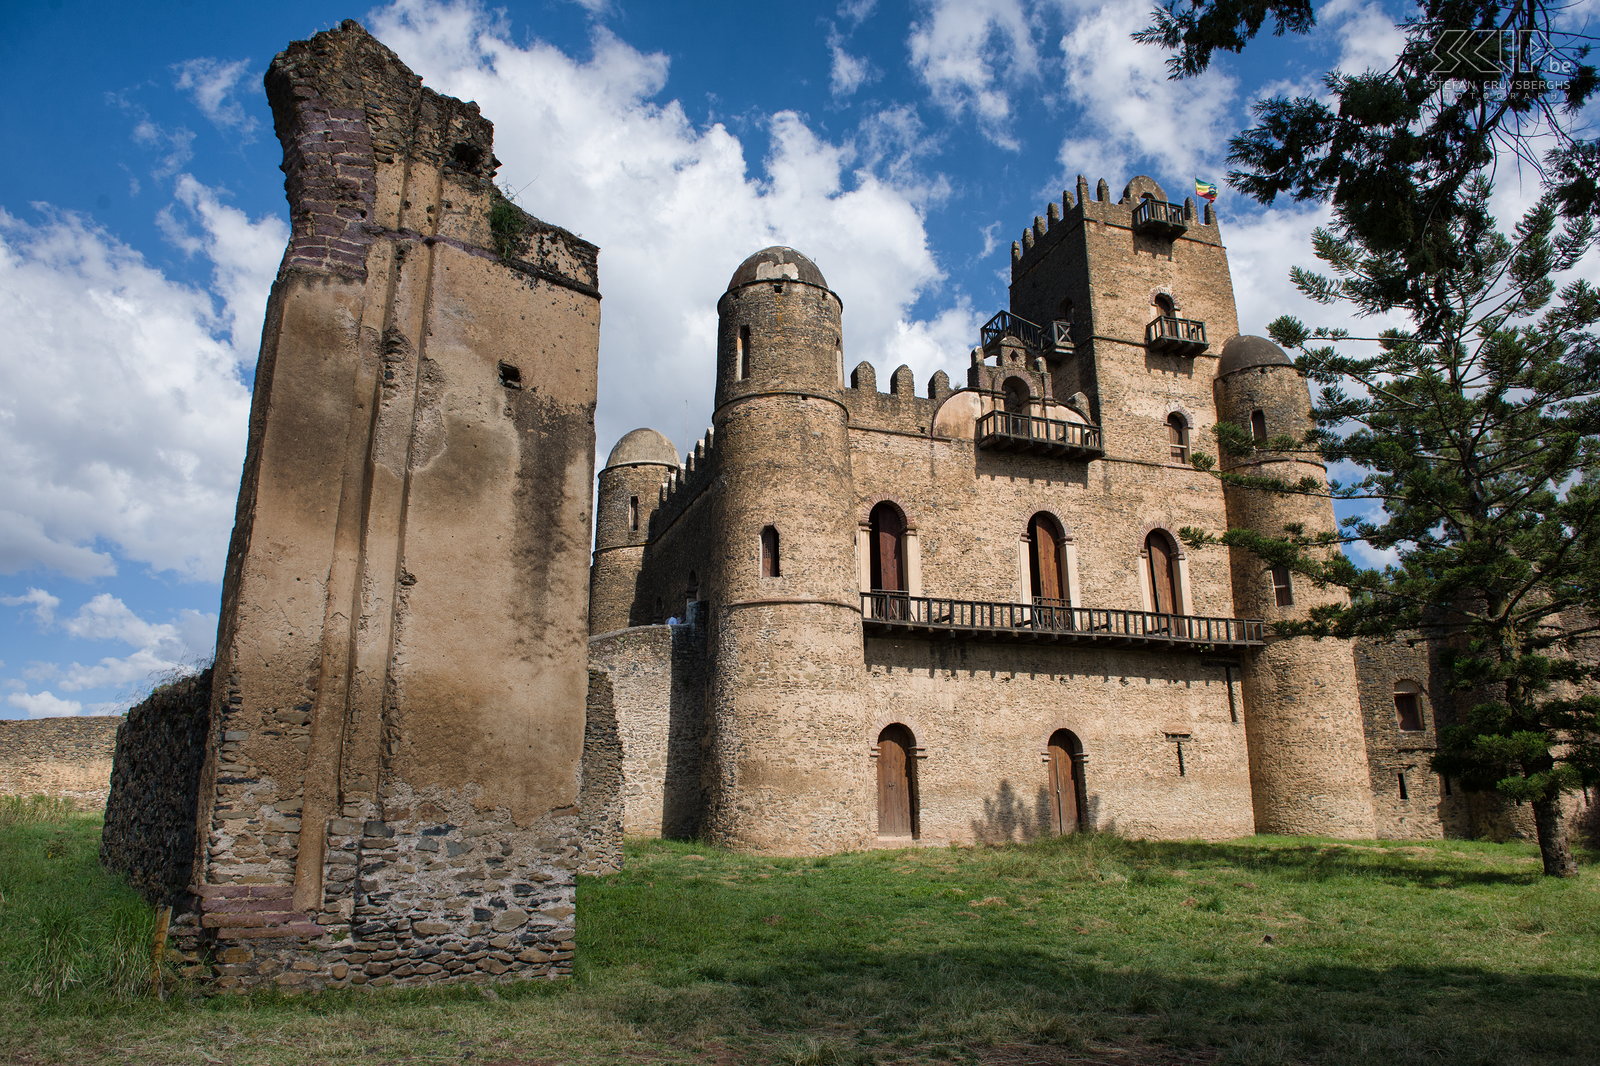 Gondar - Fasiladas' palace Gondar is famous for the impressive city walls, palaces and baths which where build by emperor Fasiladas in the 17th century. The 16 castles of Fasil Ghebbi are also on the UNESCO World Heritage list. Stefan Cruysberghs